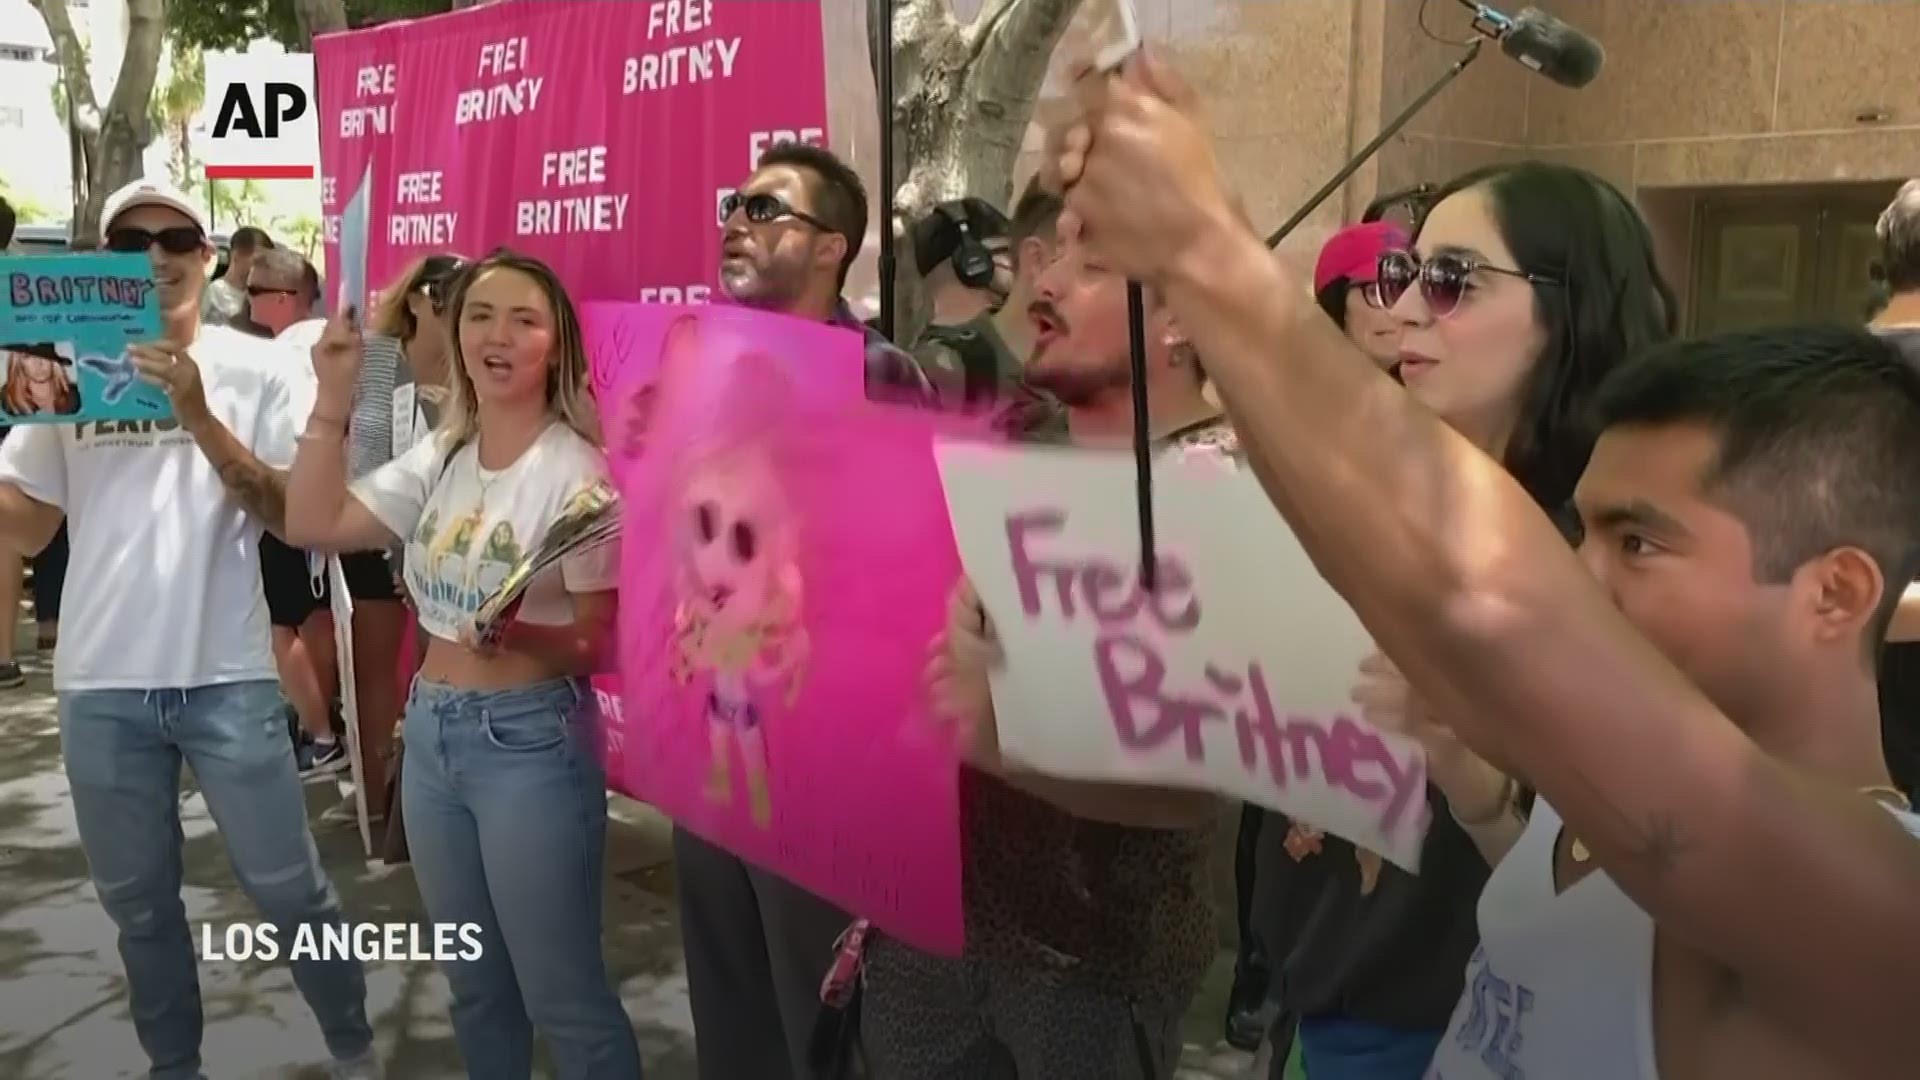 Britney Spears’ powerful plea to a judge to end the conservatorship that has controlled her life since 2008 brought sympathy and outrage from fans, famous supporters